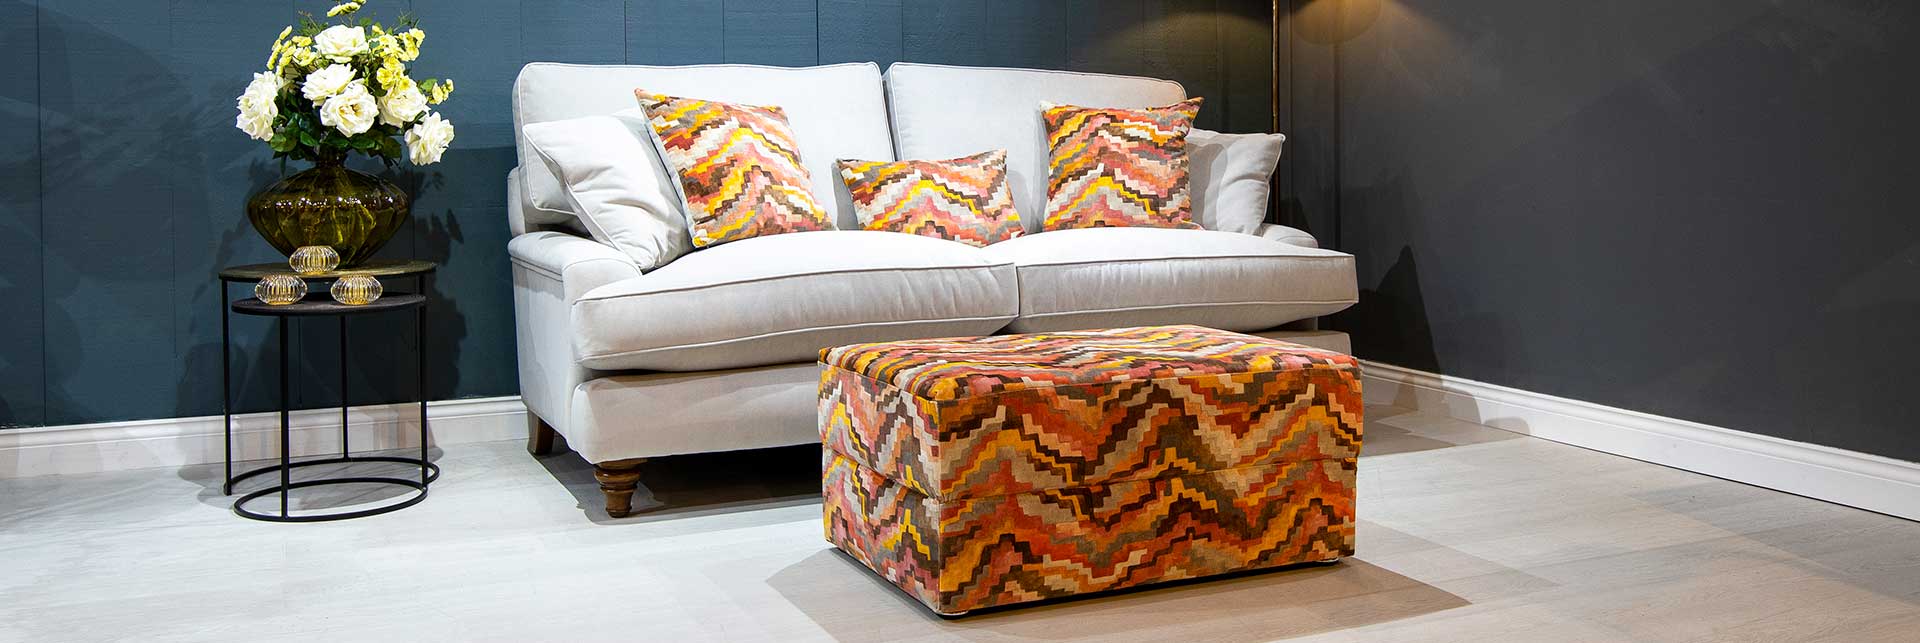 Bespoke footstools and storage ottomans made by New England Home Interiors